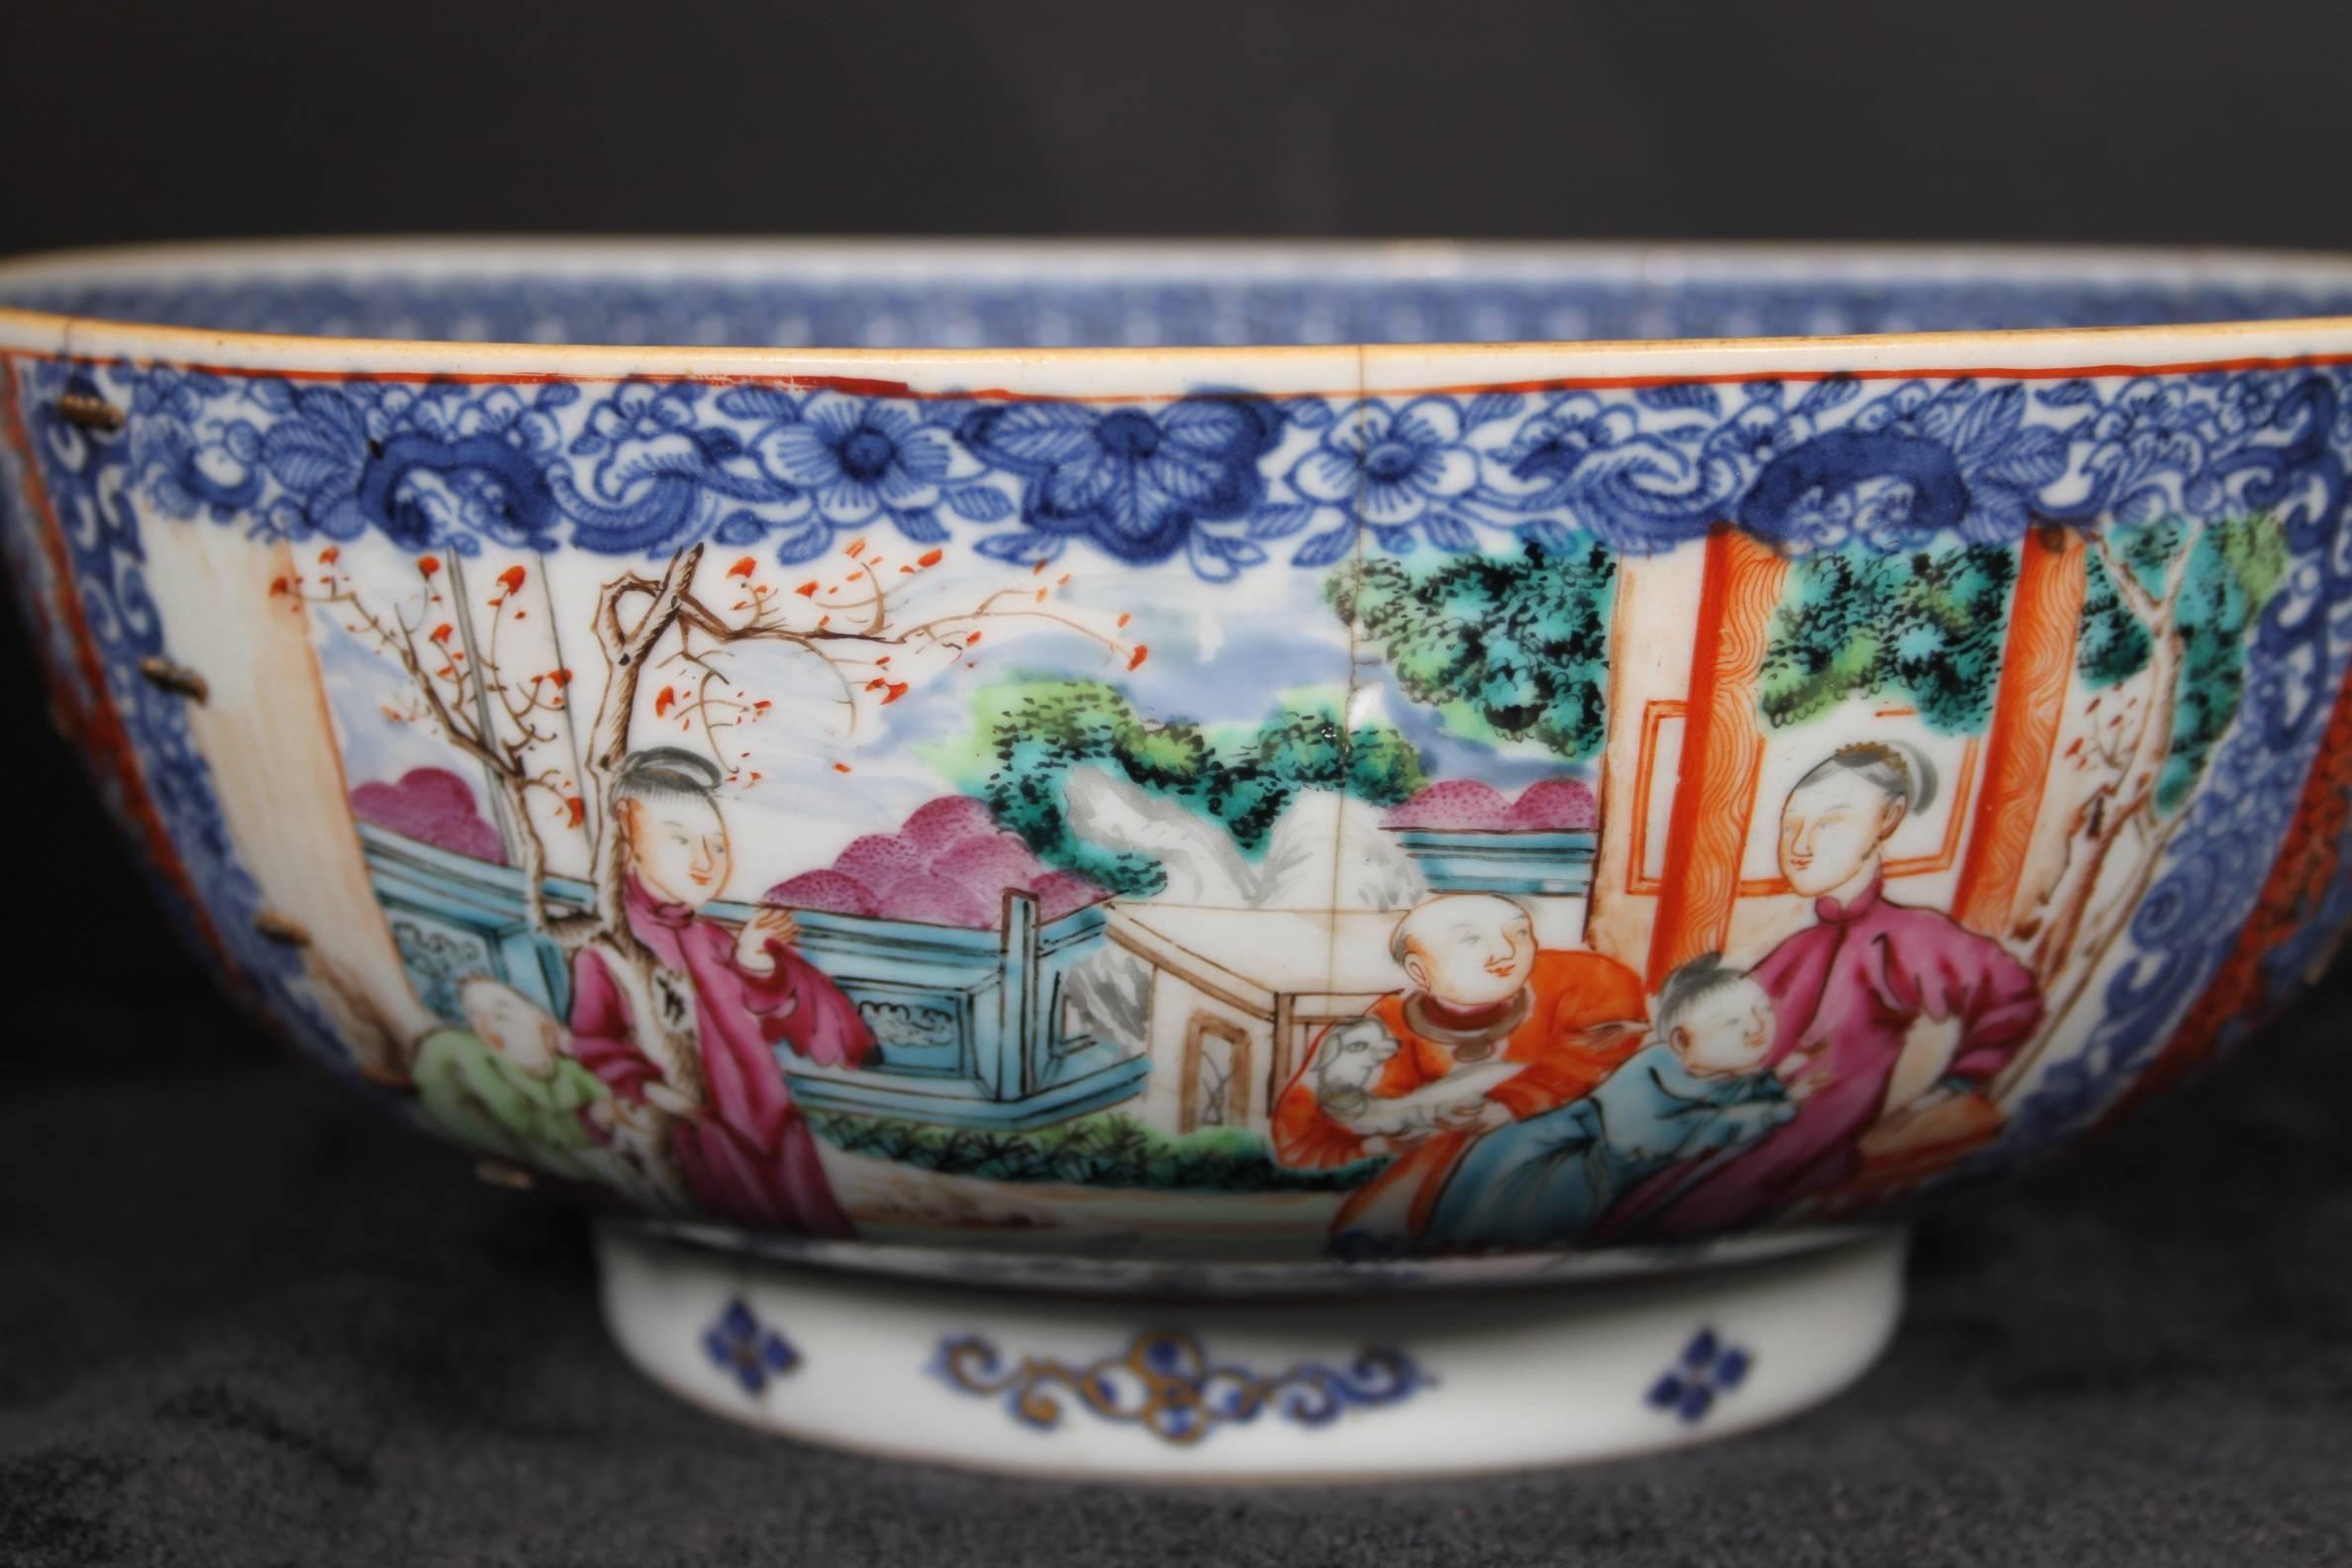 18th Century Qianlong Qing Dynasty Chinese Export Ware Porcelain Punch Bowl For Sale 6